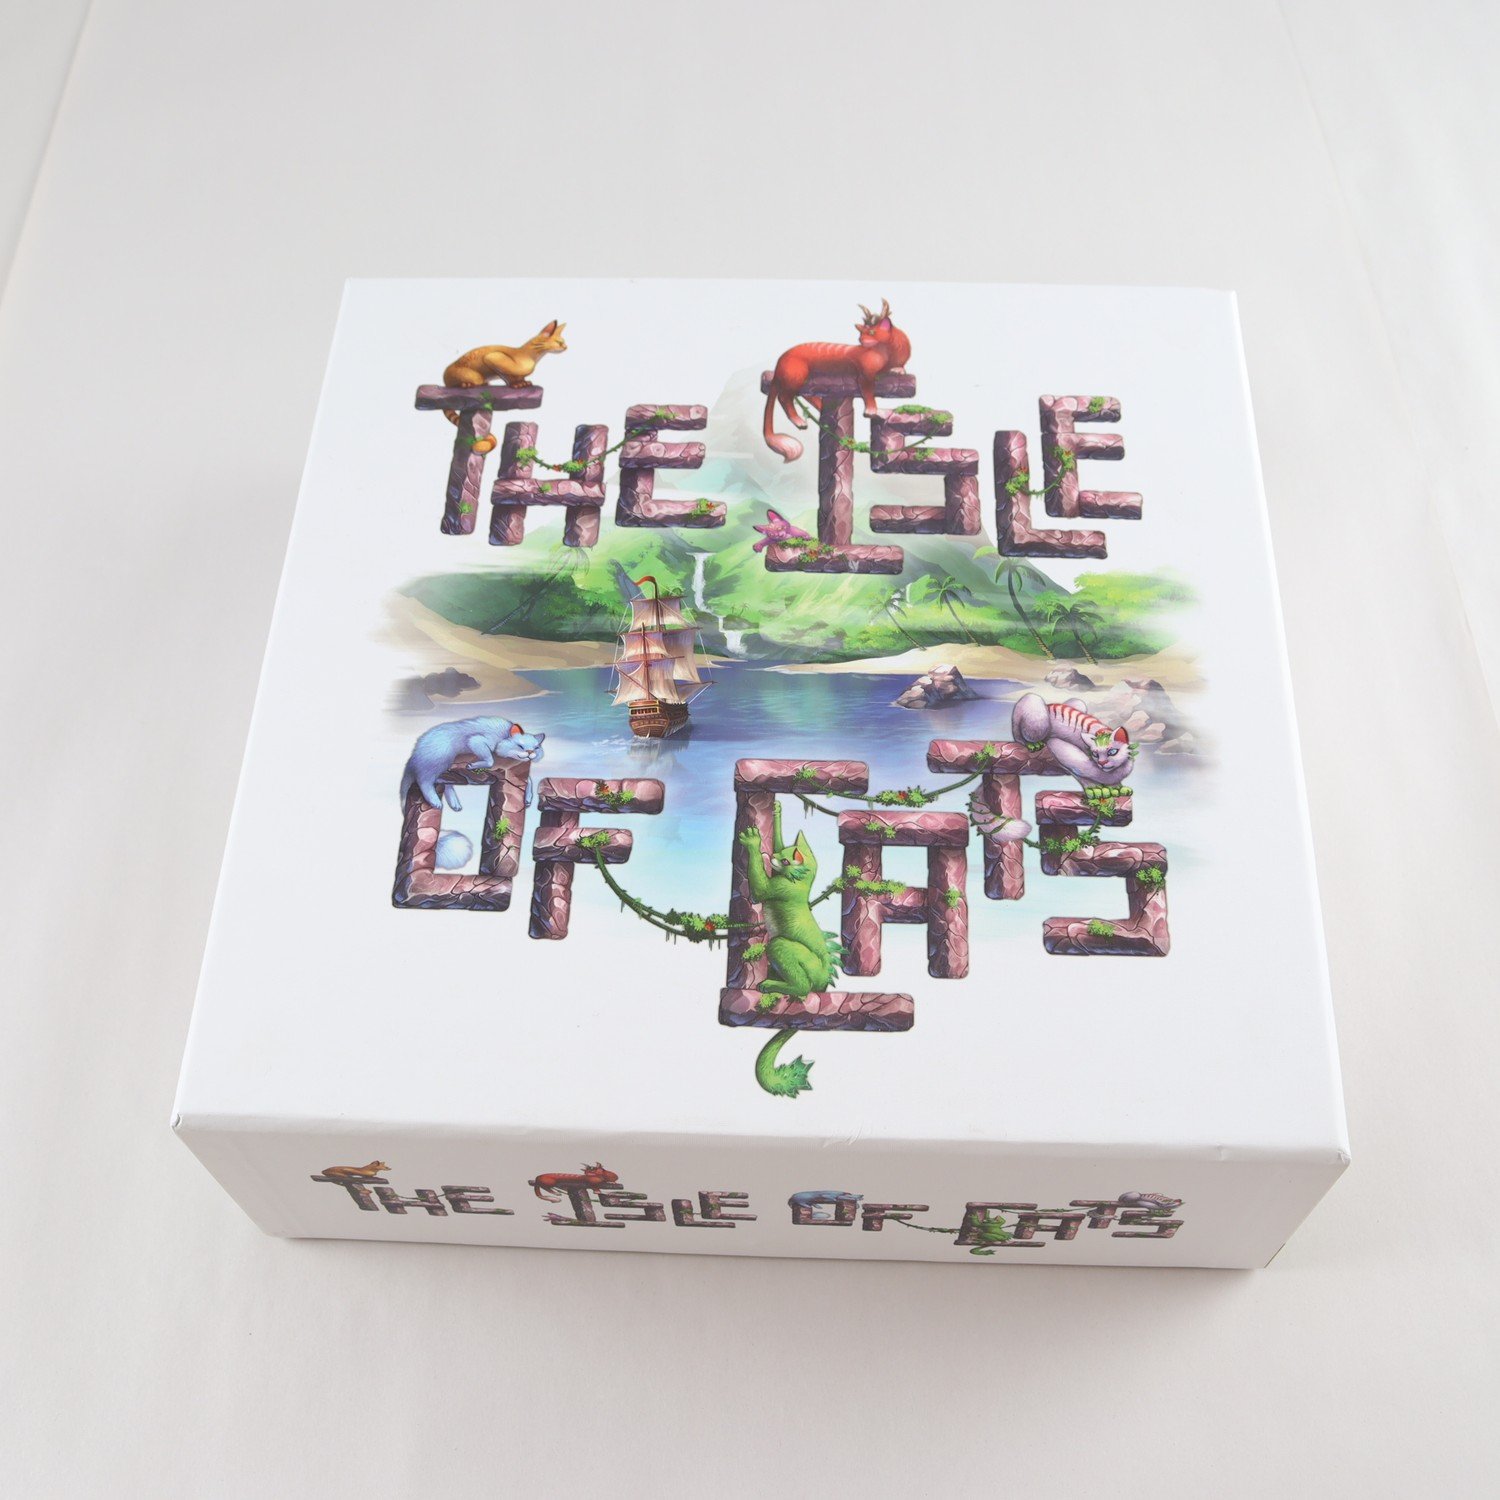 Spel, The isle of cats, frank west design.